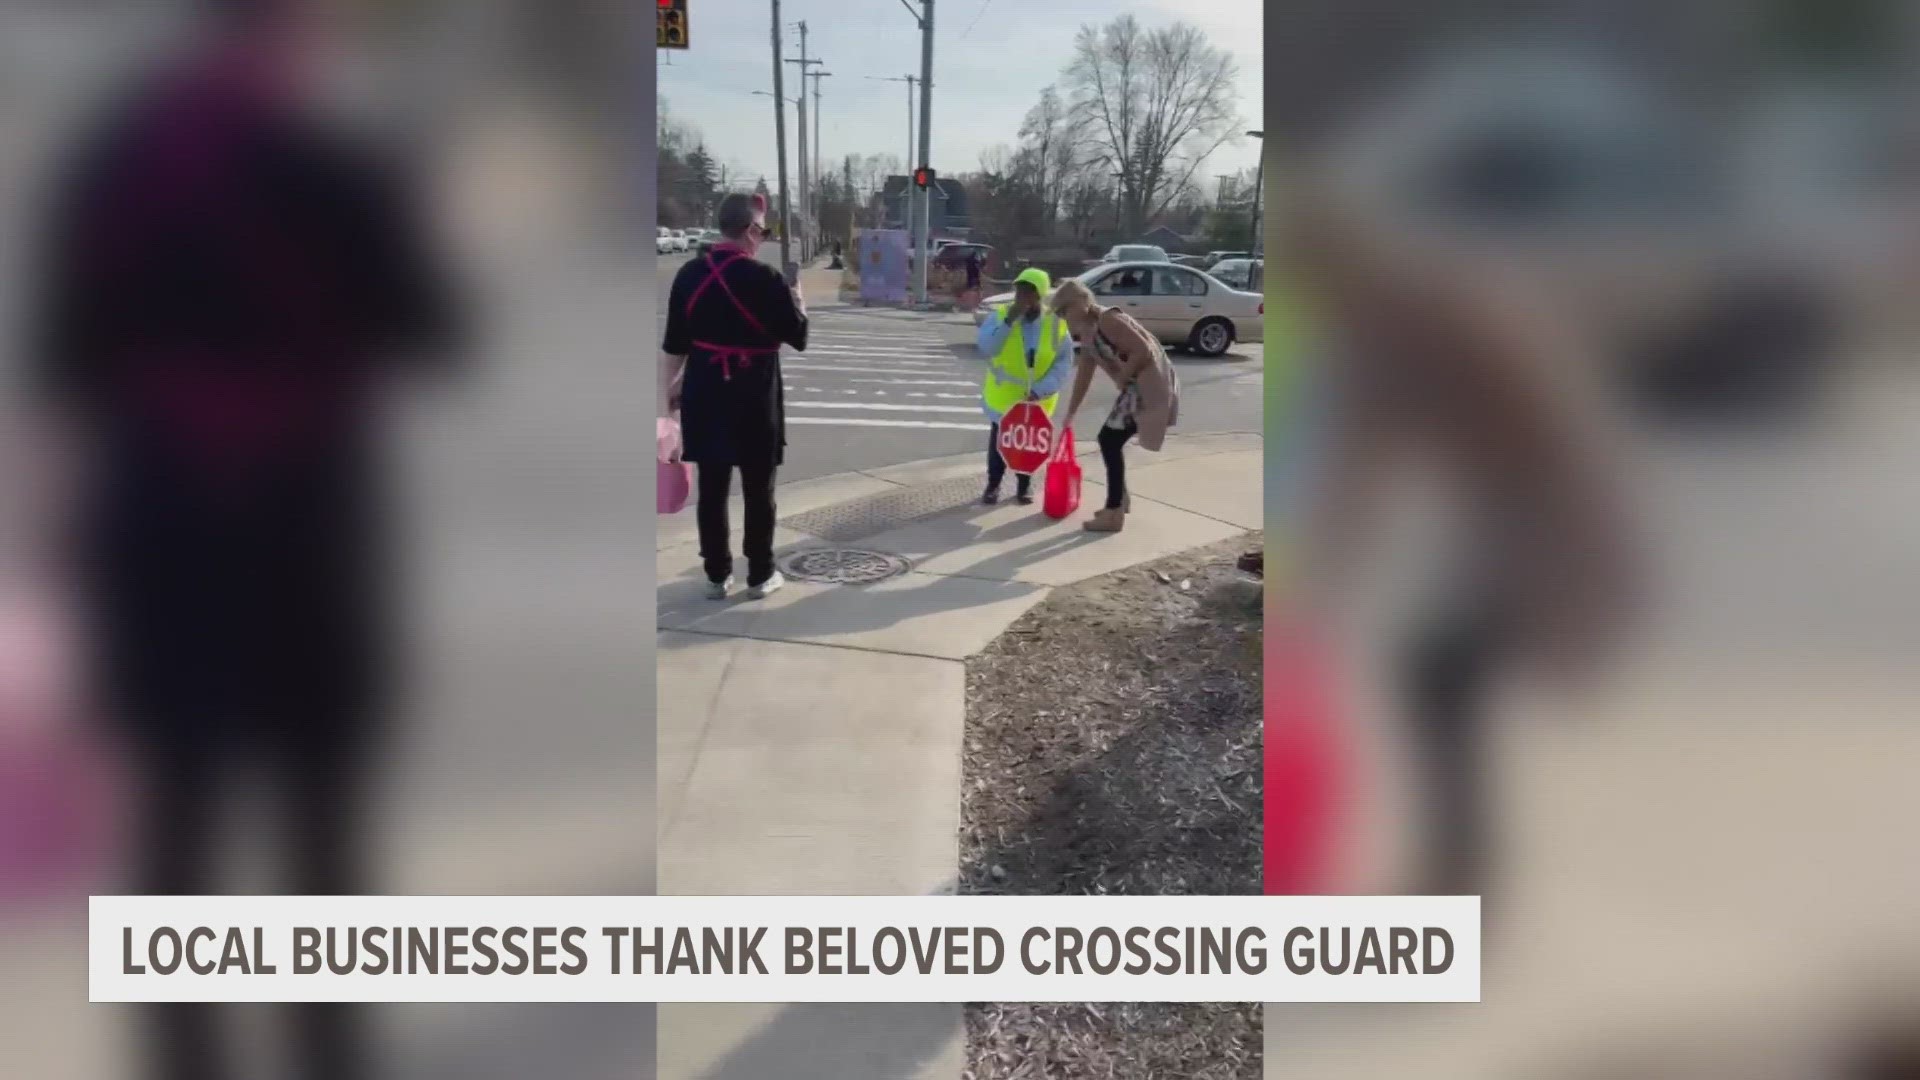 Jenna Arcidiacono said she would drive by and see 70-year-old Brenda Dobbs smiling and waving, she was so inspired she had to do something to give back to her.